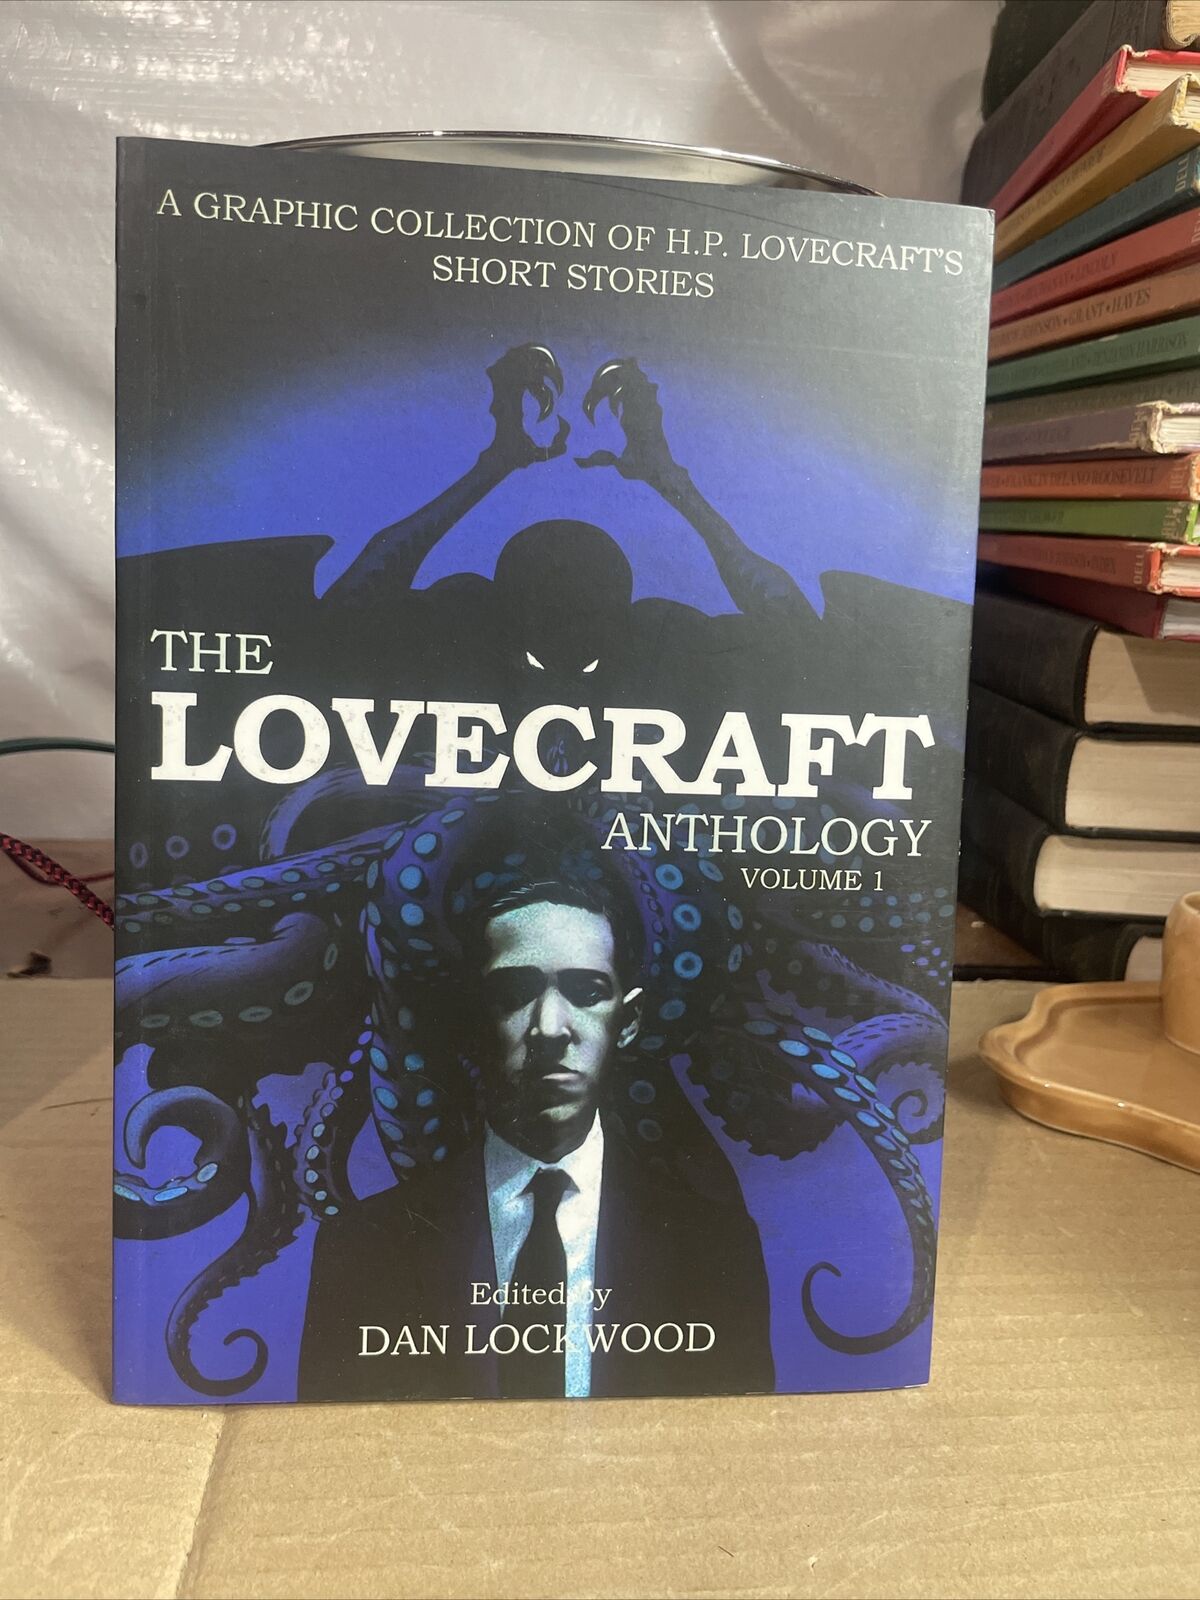 LOVECRAFT ANTHOLOGY: VOLUME 1 Paperback By Lovecraft, H.P.  First Print